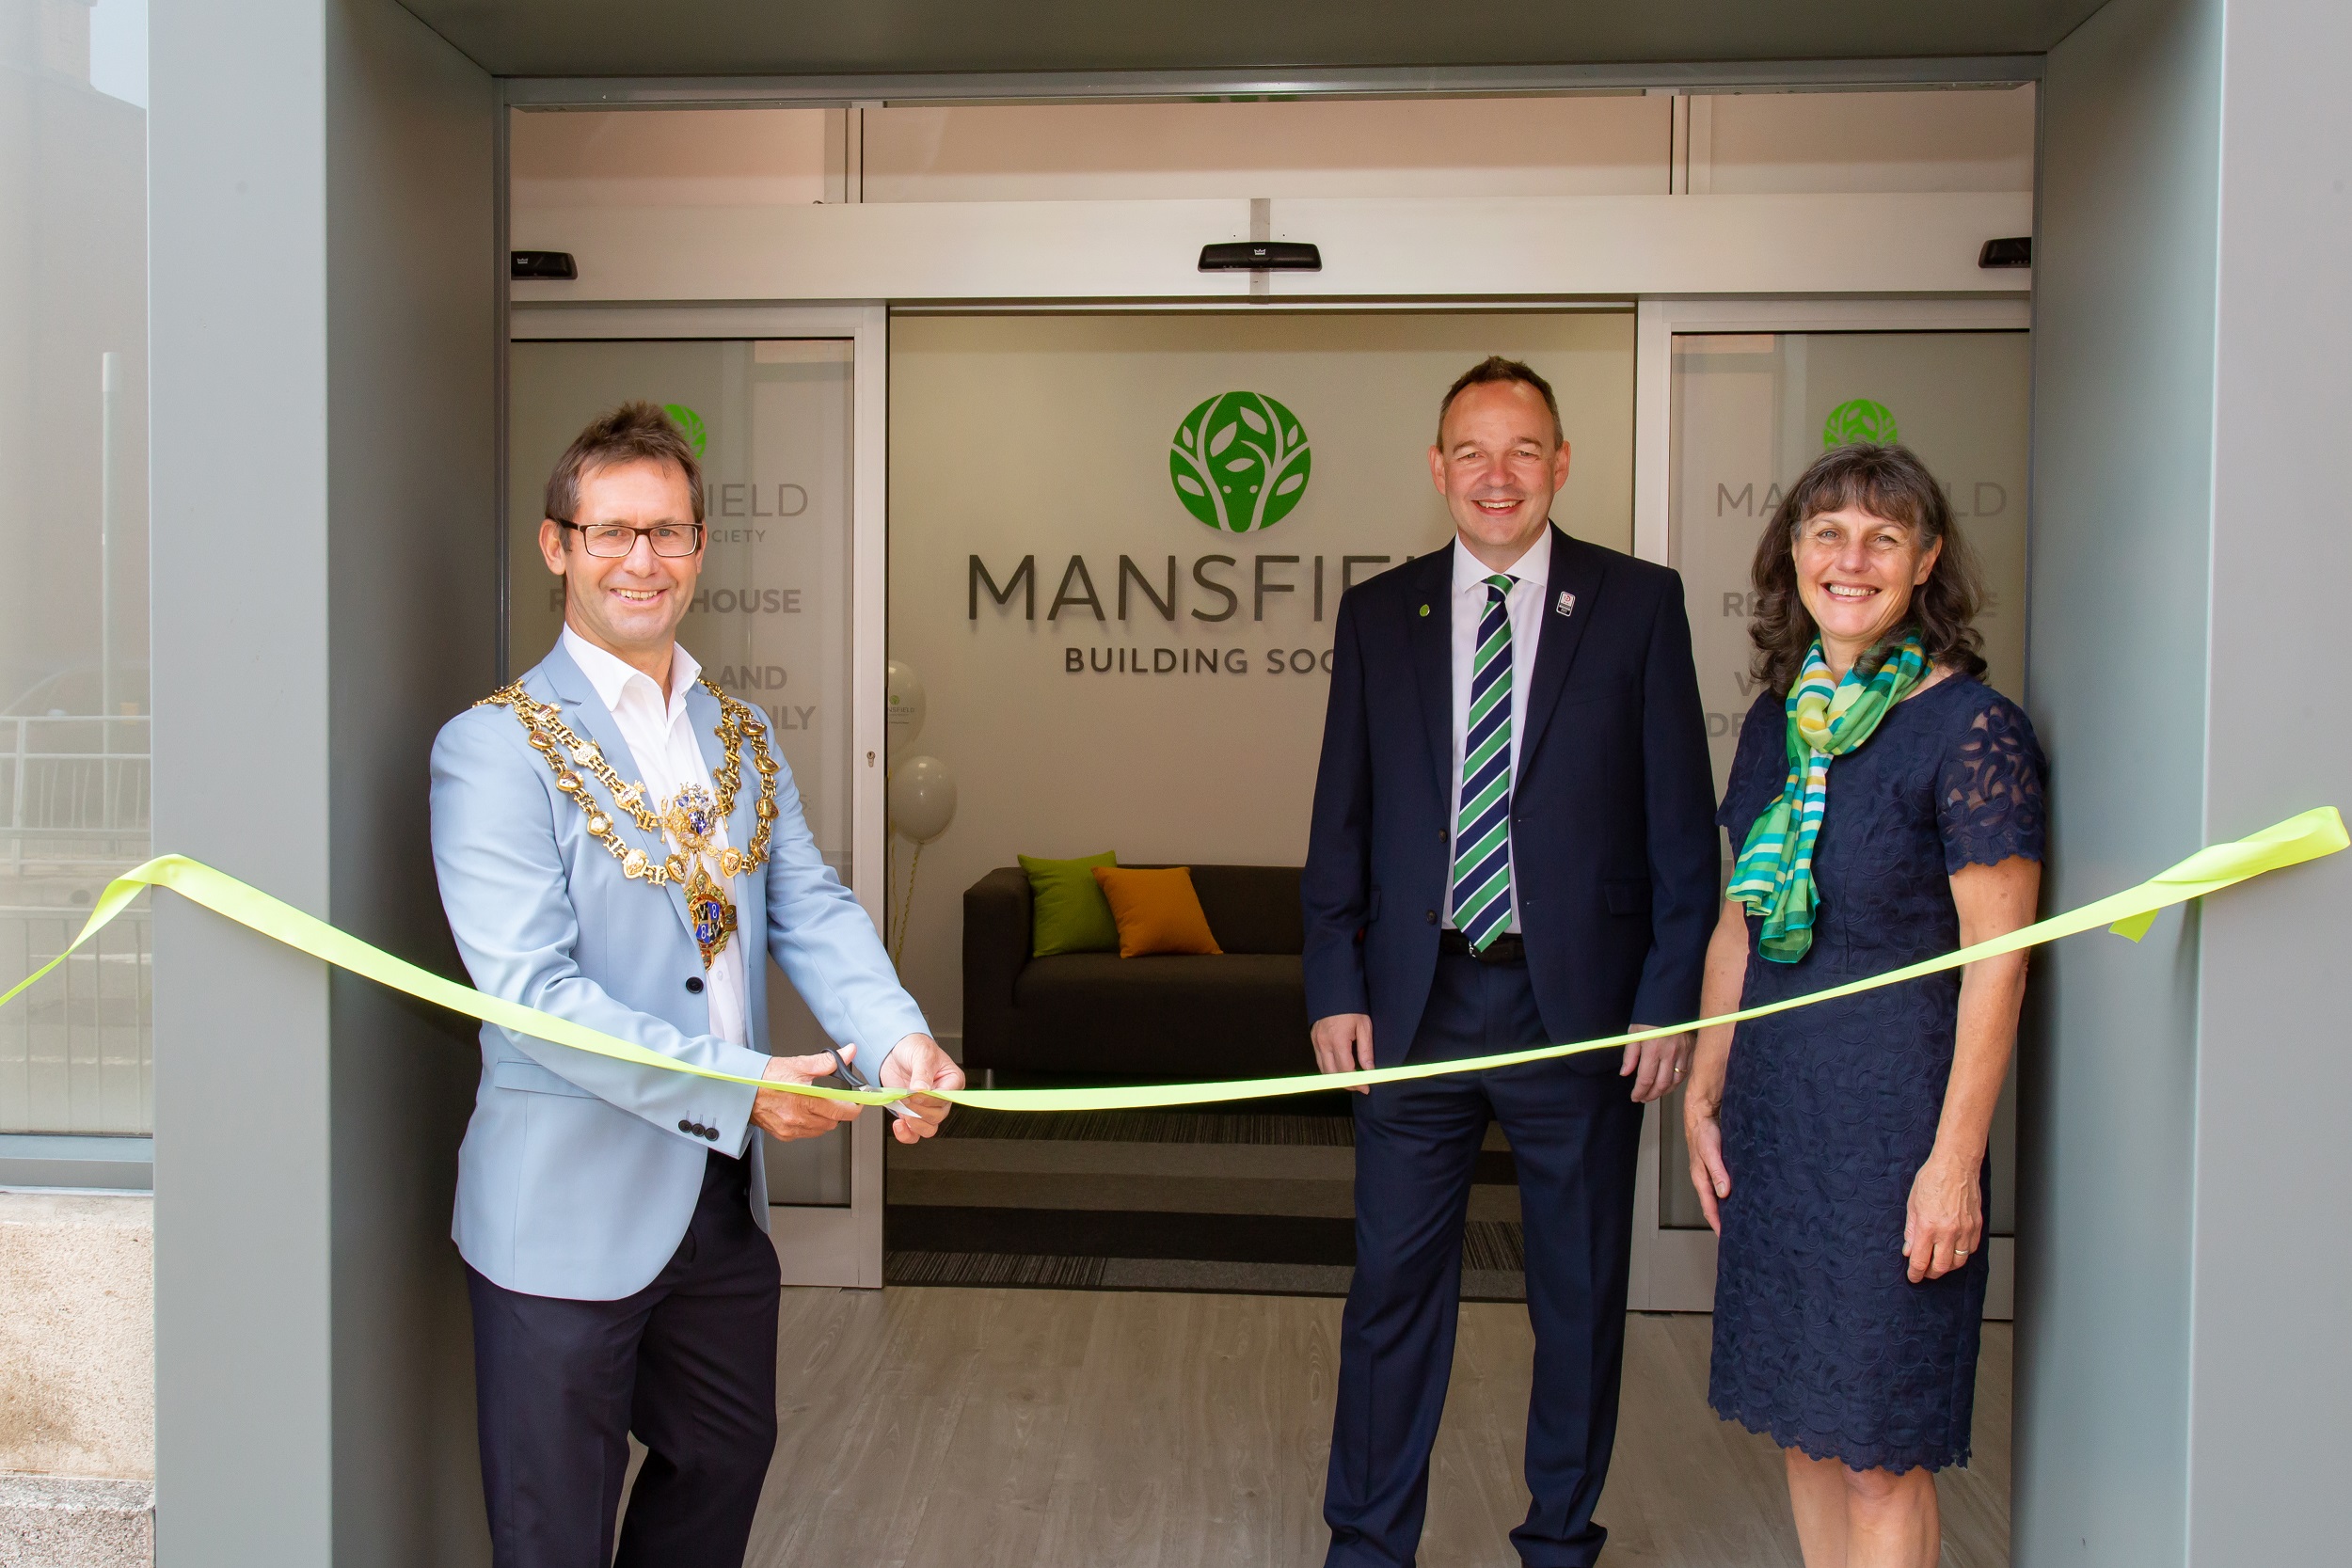 Man cutting ribbon to mansfield building society